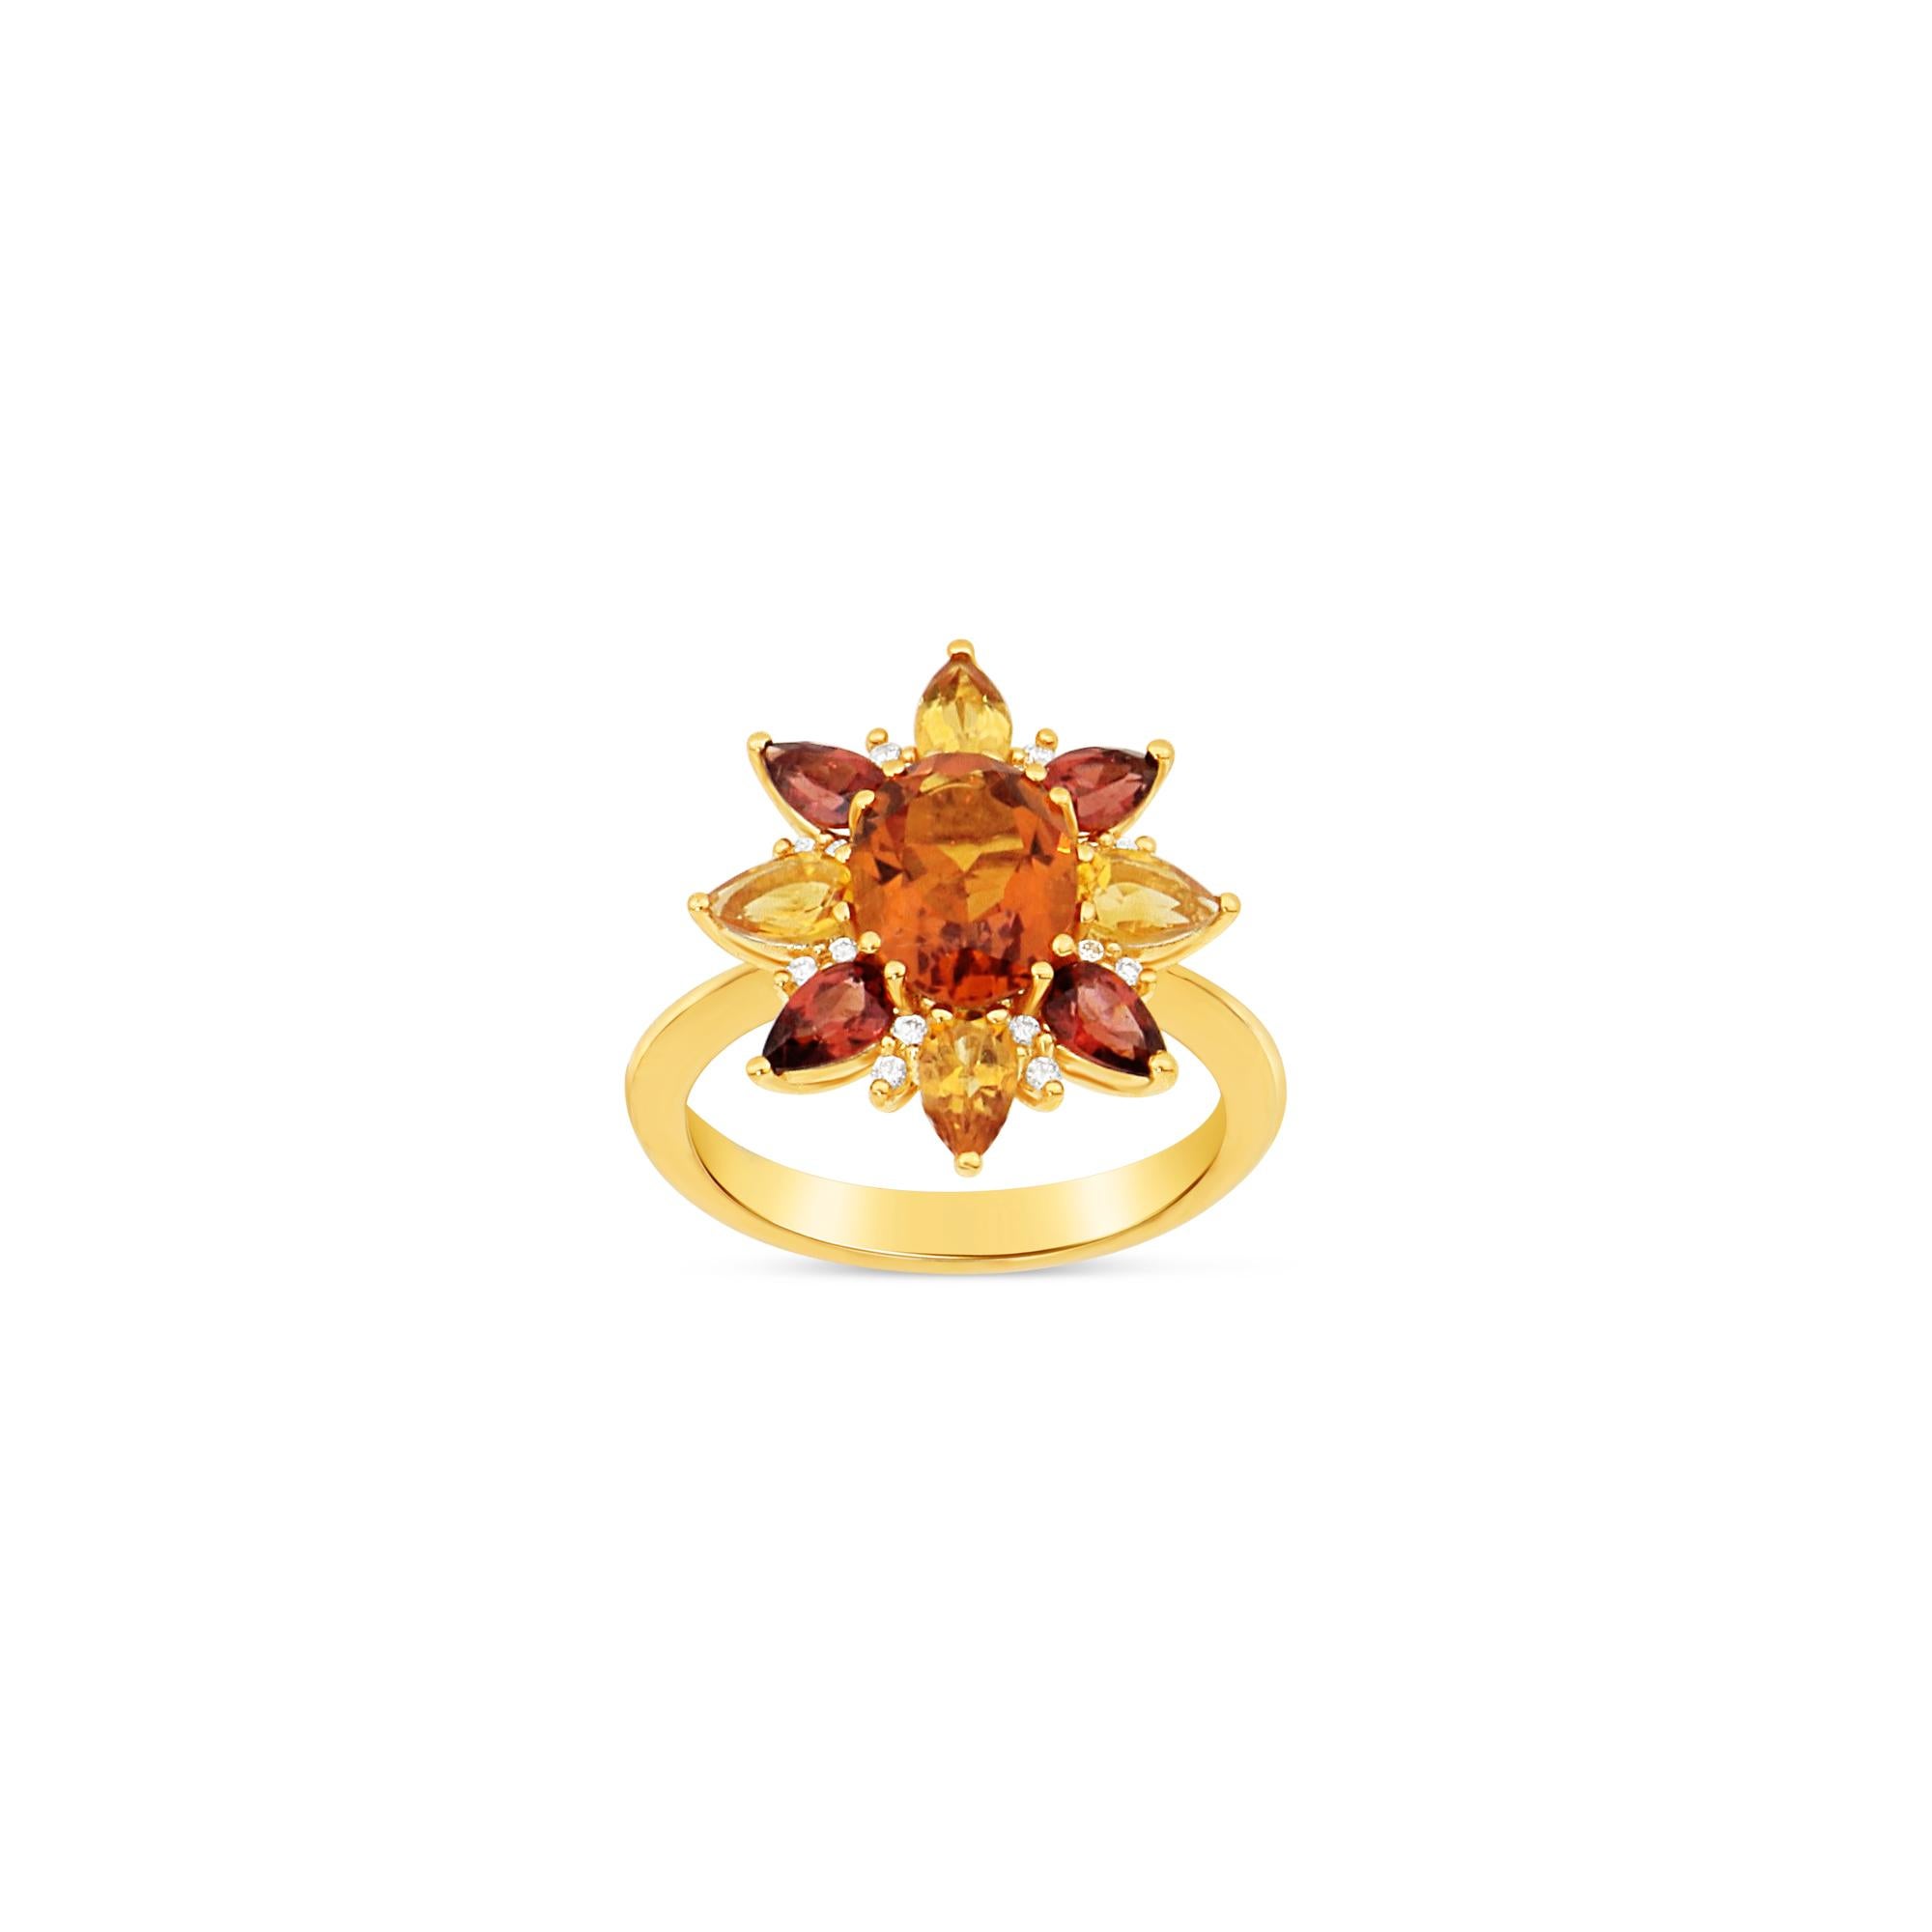 Introducing our Orange and Red Star Ring – a radiant masterpiece designed to complement your vibrant personality and ignite a fiery elegance in your style. This exquisite ring is the perfect accessory to elevate your look.

Indulge in the luxury of